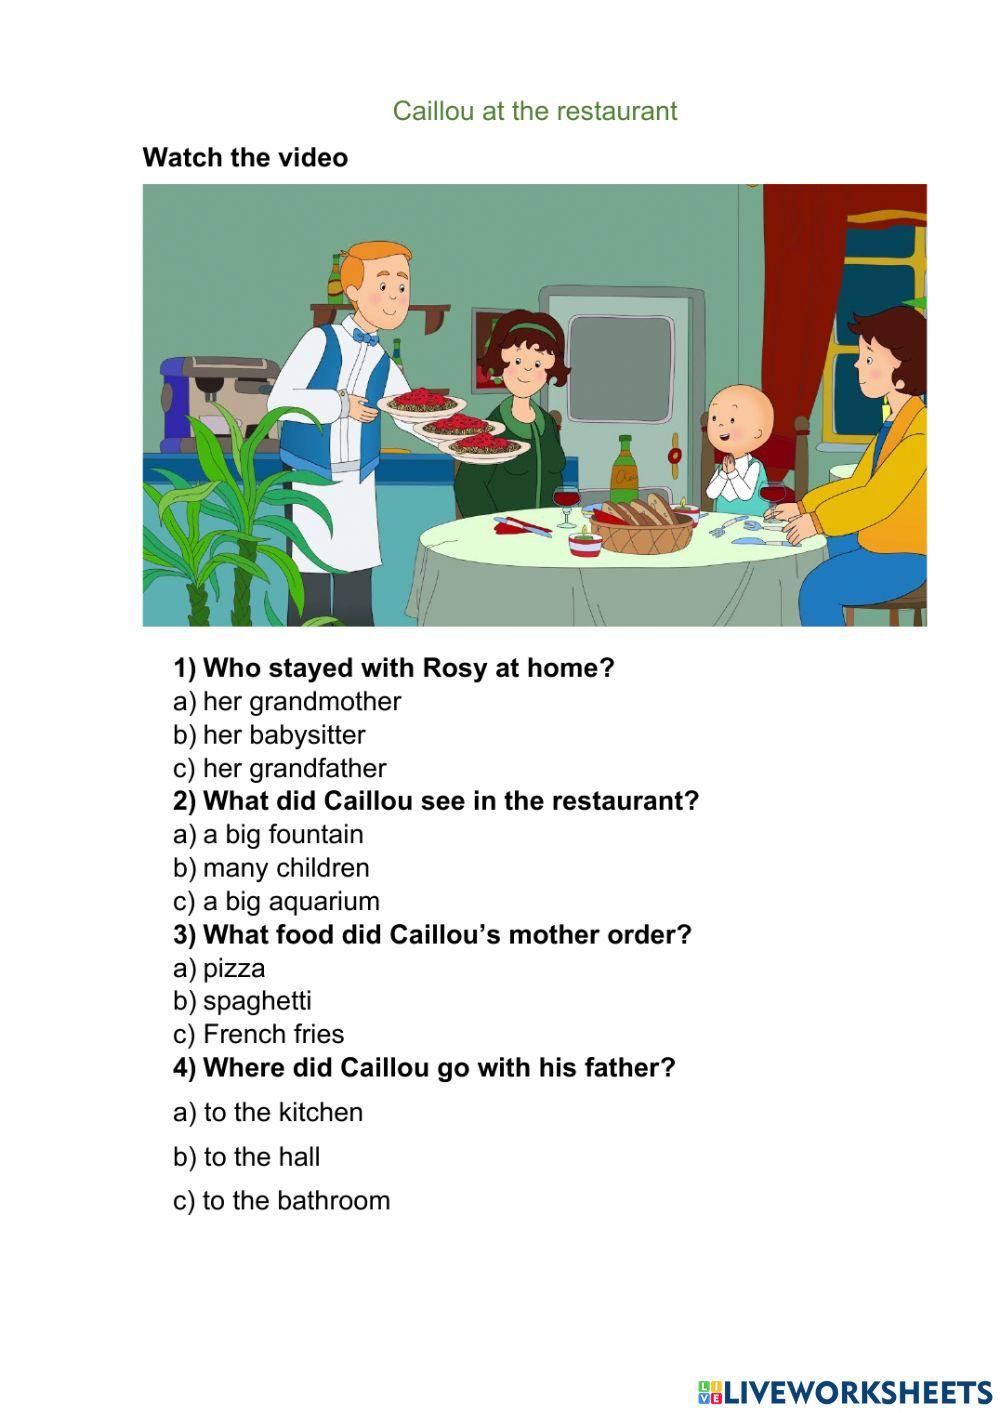 Caillou at the restaurant